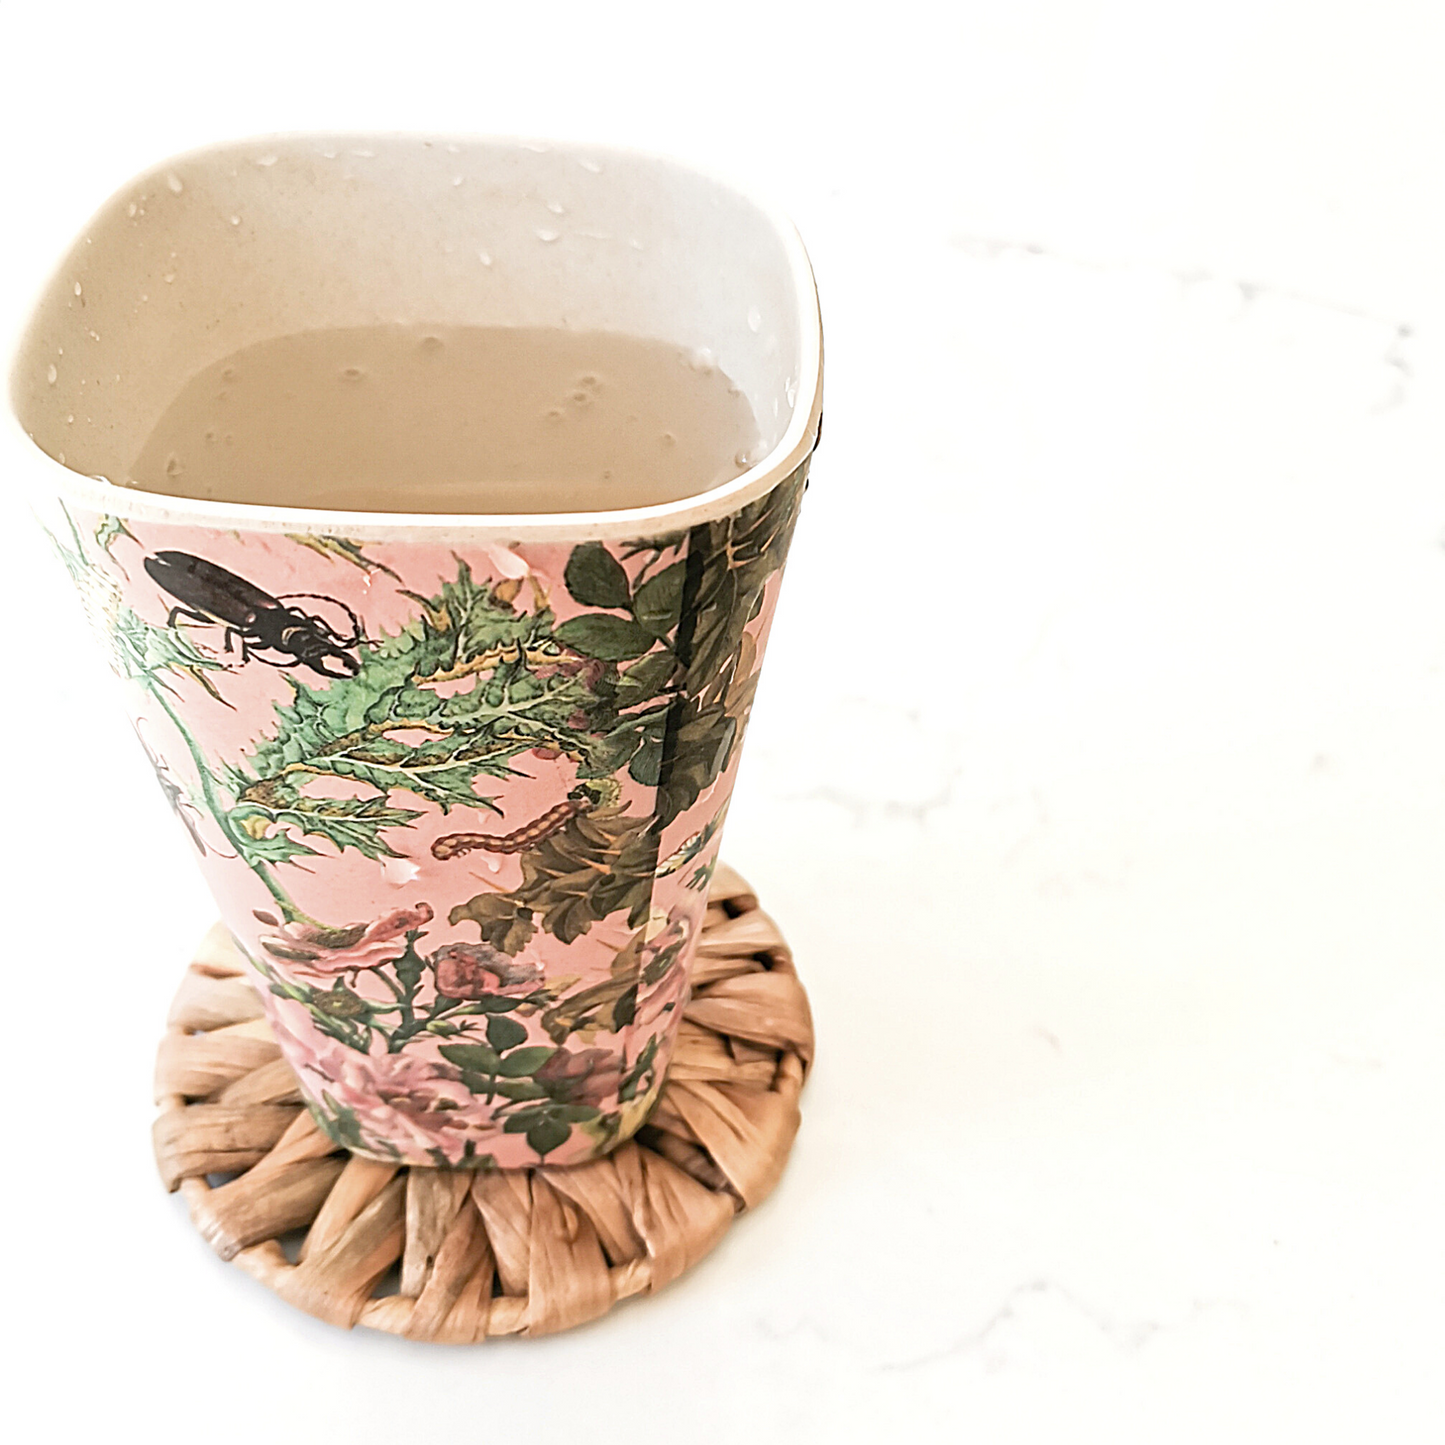 Rounded natural seagrass coasters for cups, mugs, tumblers.